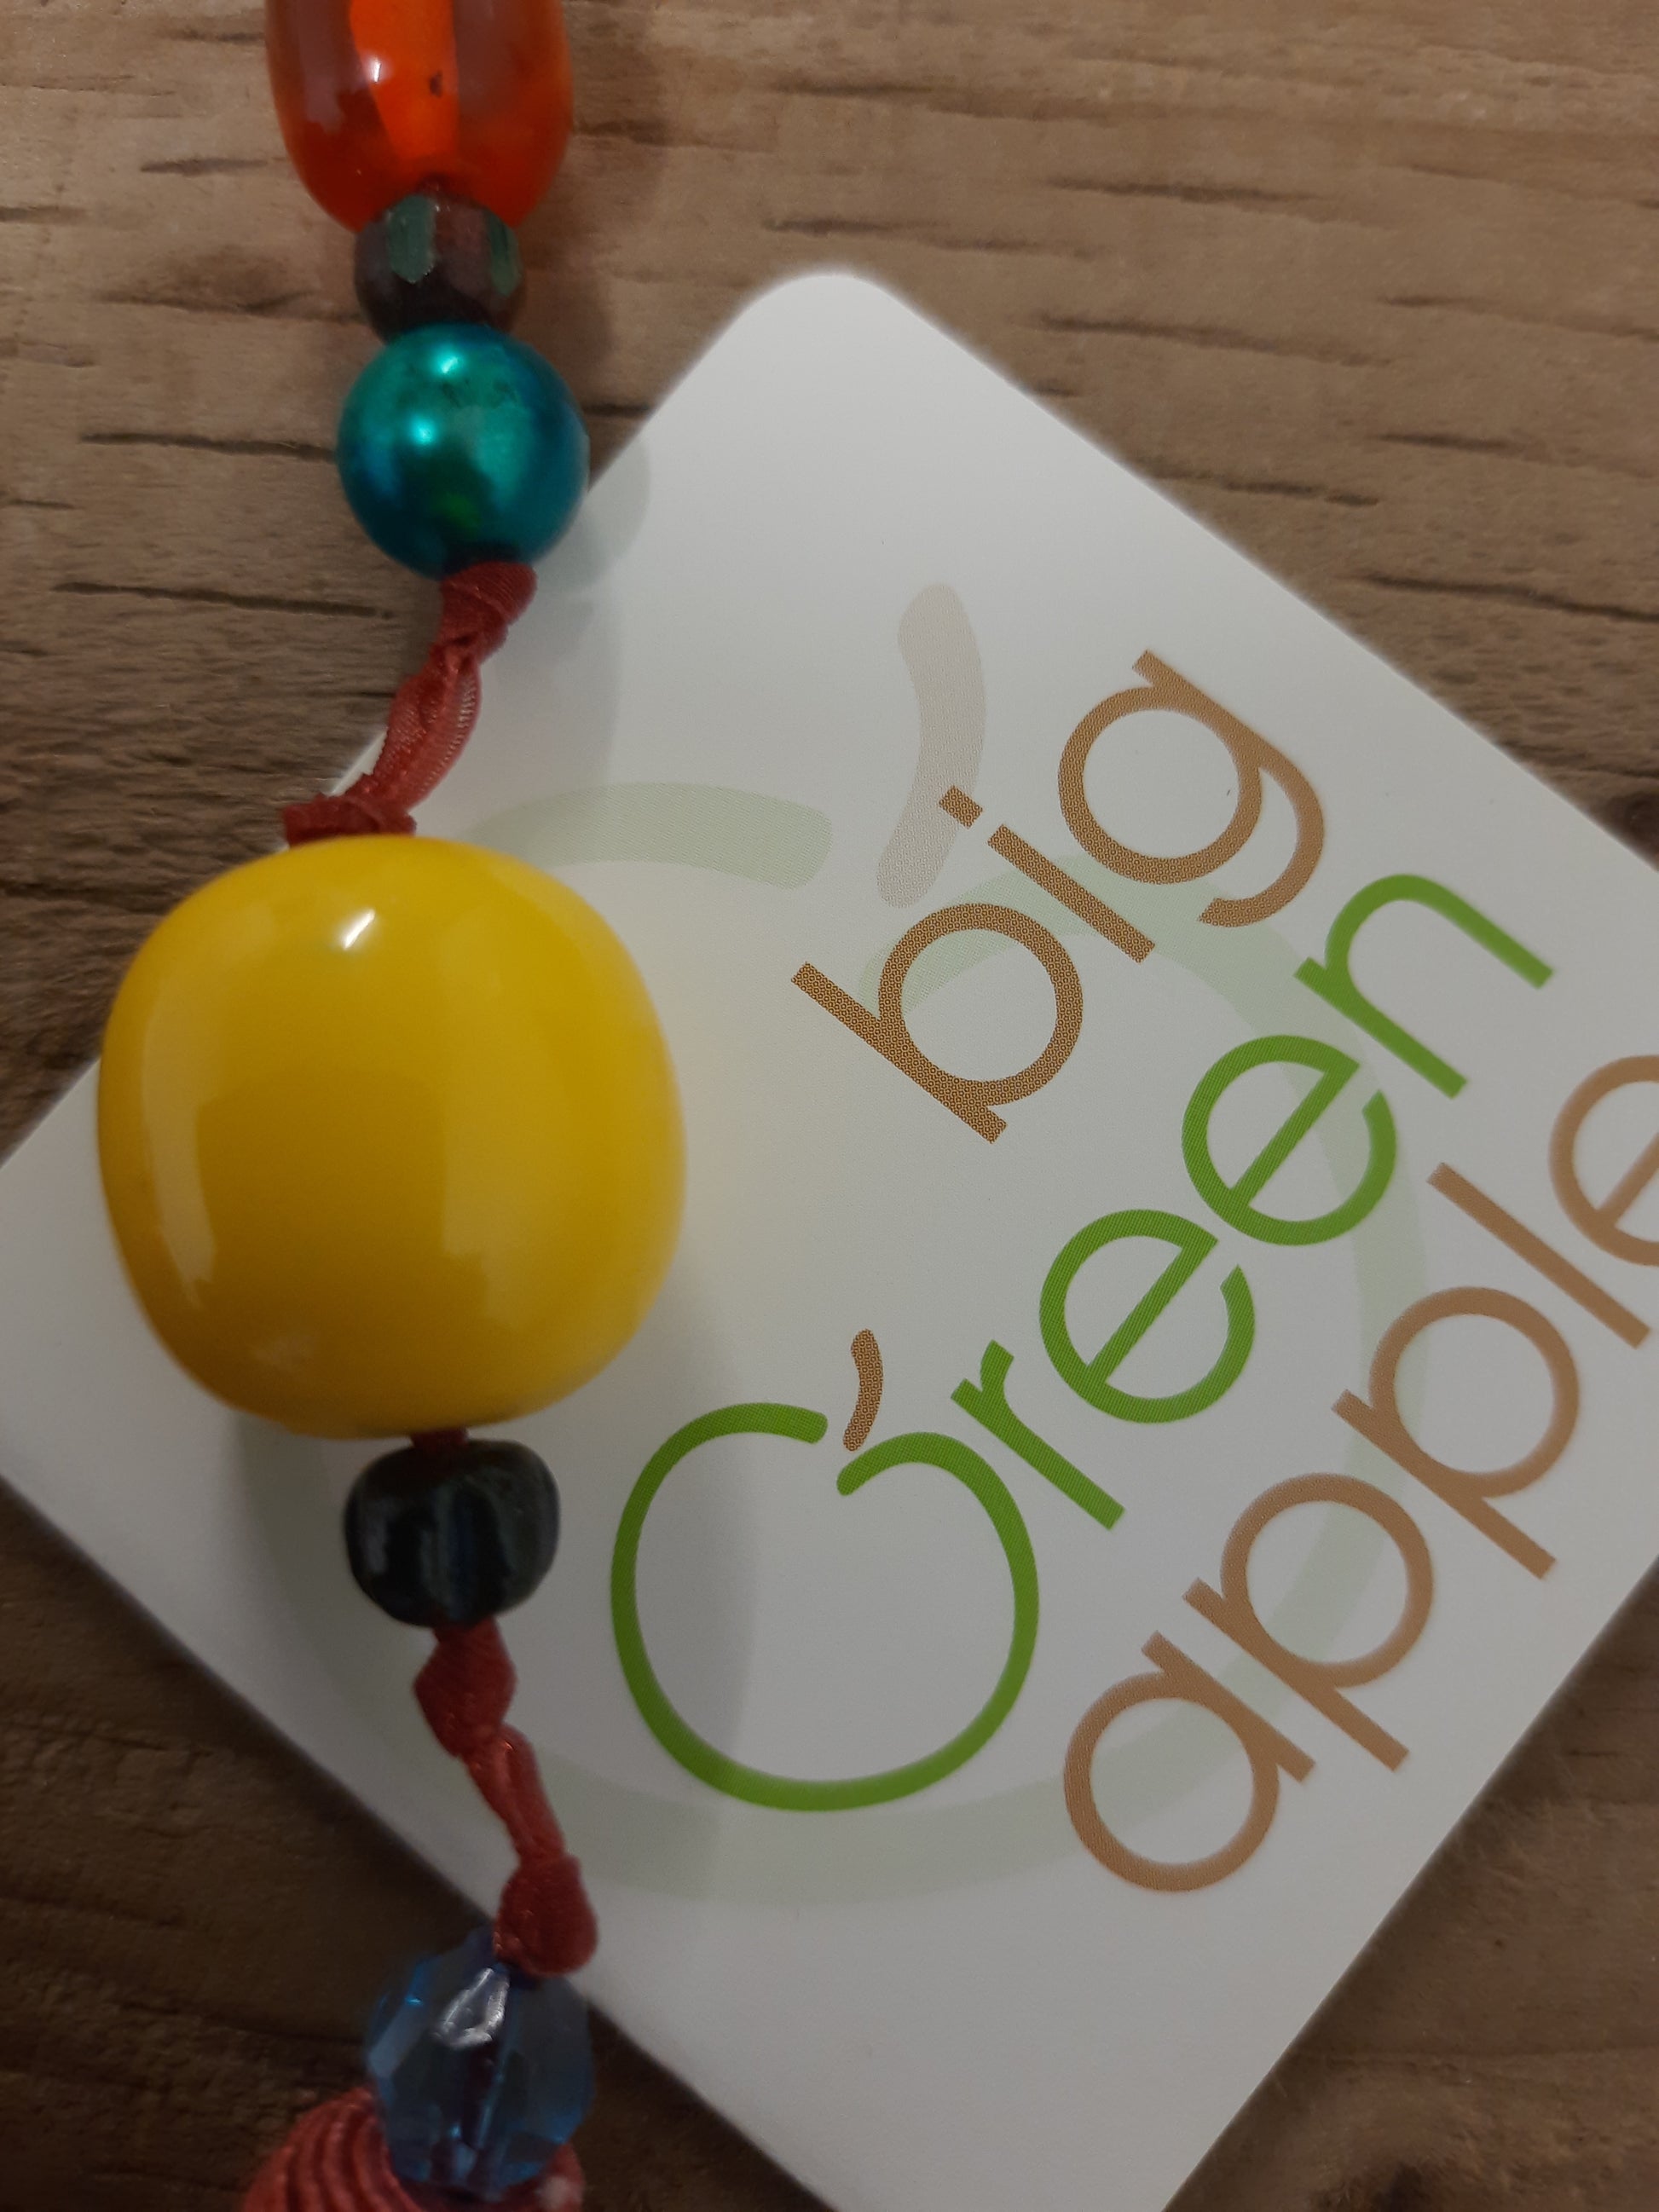 Necklaces, Valentines Day Gifts, Fair Trade Jewellery, Eco Friendly Companies, Sustainable Gifts For Her, BIG GREEN APPLE 